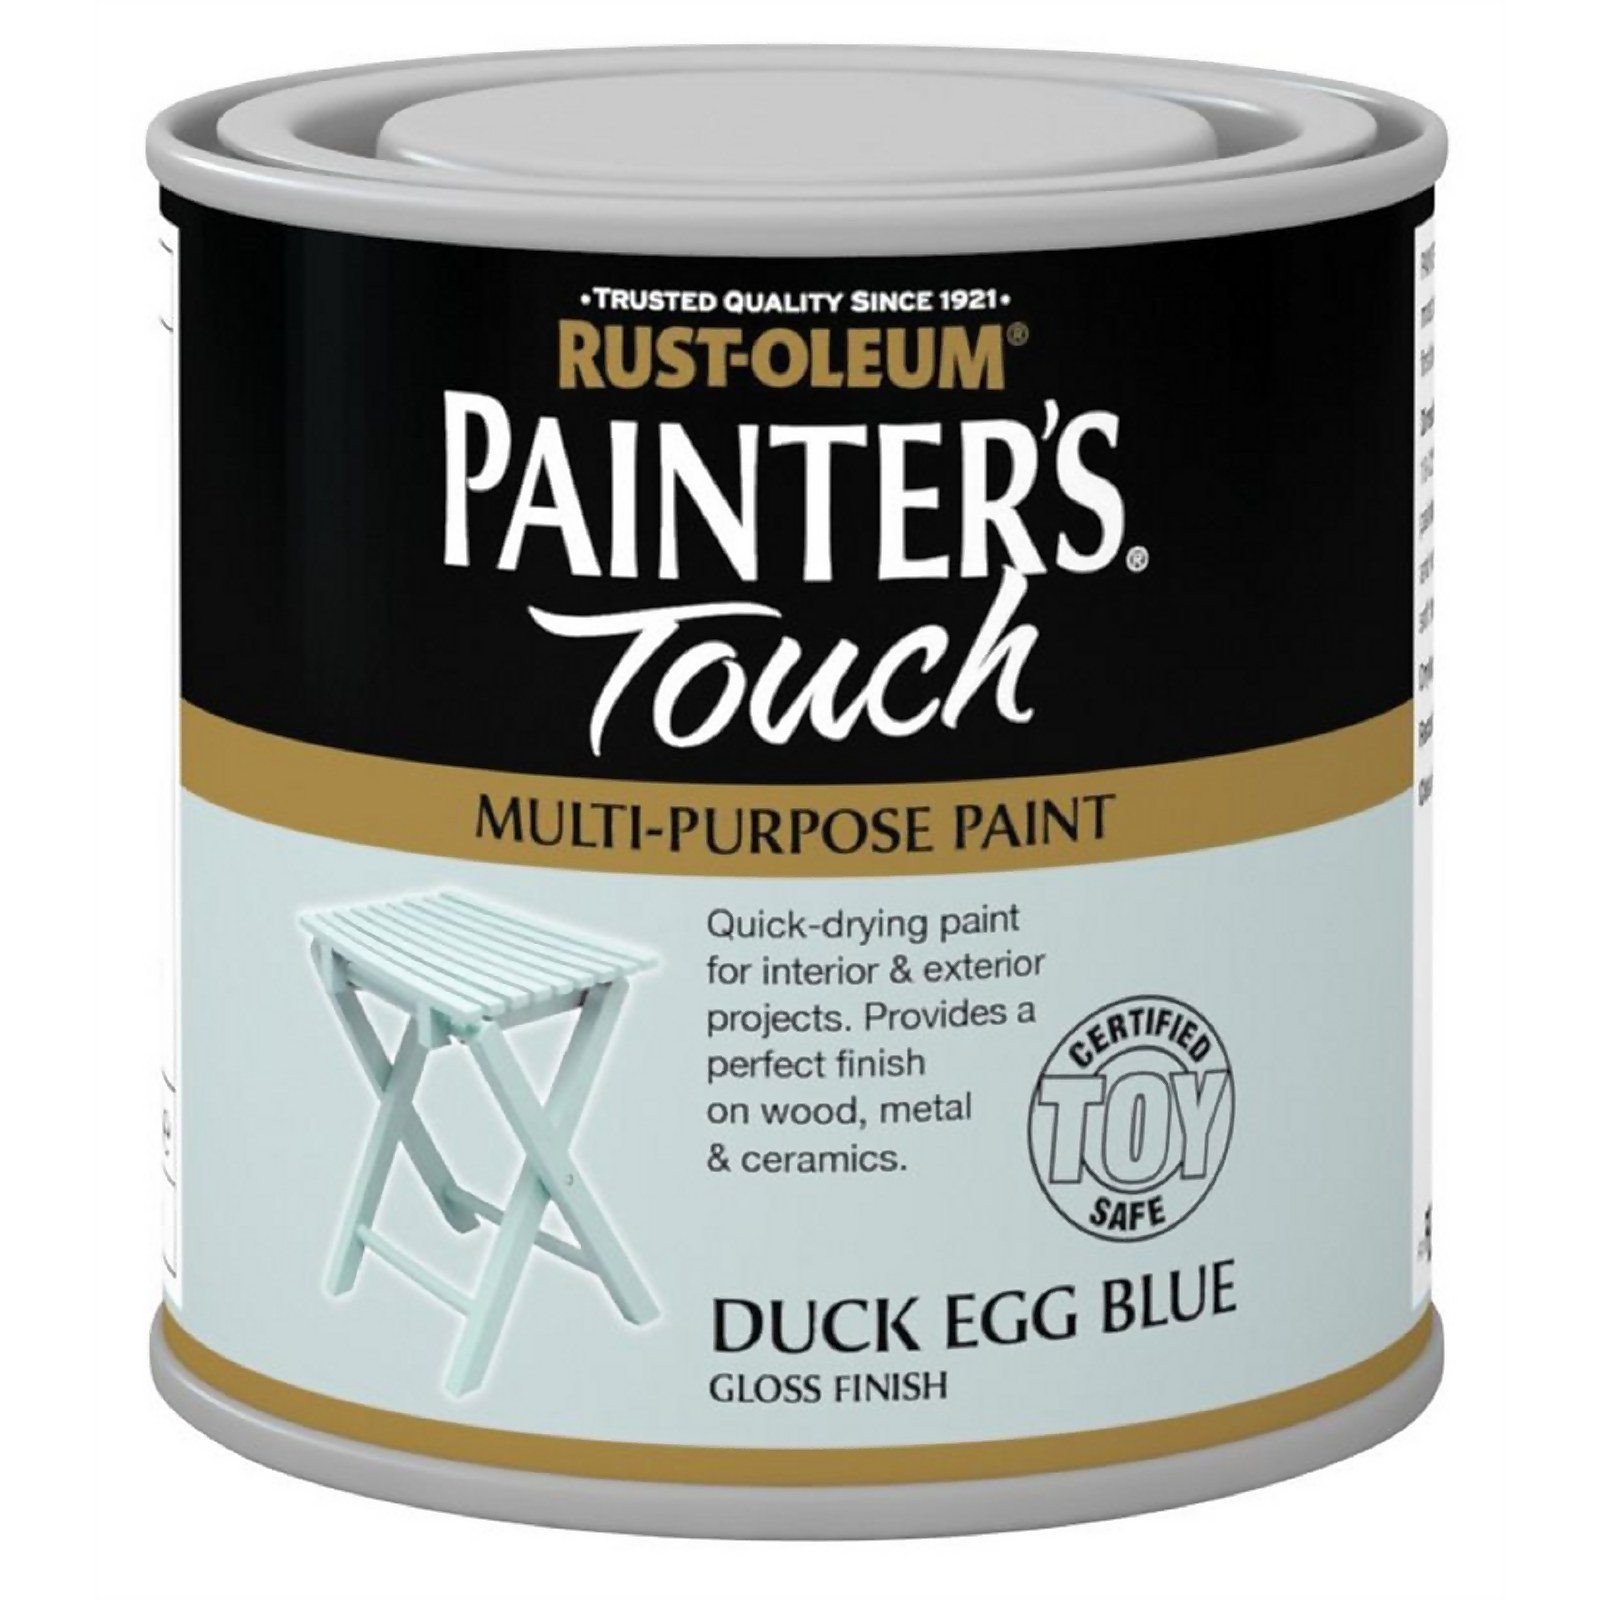 Photo of Rust-oleum Painters Touch Duck Egg Blue Gloss - 250ml